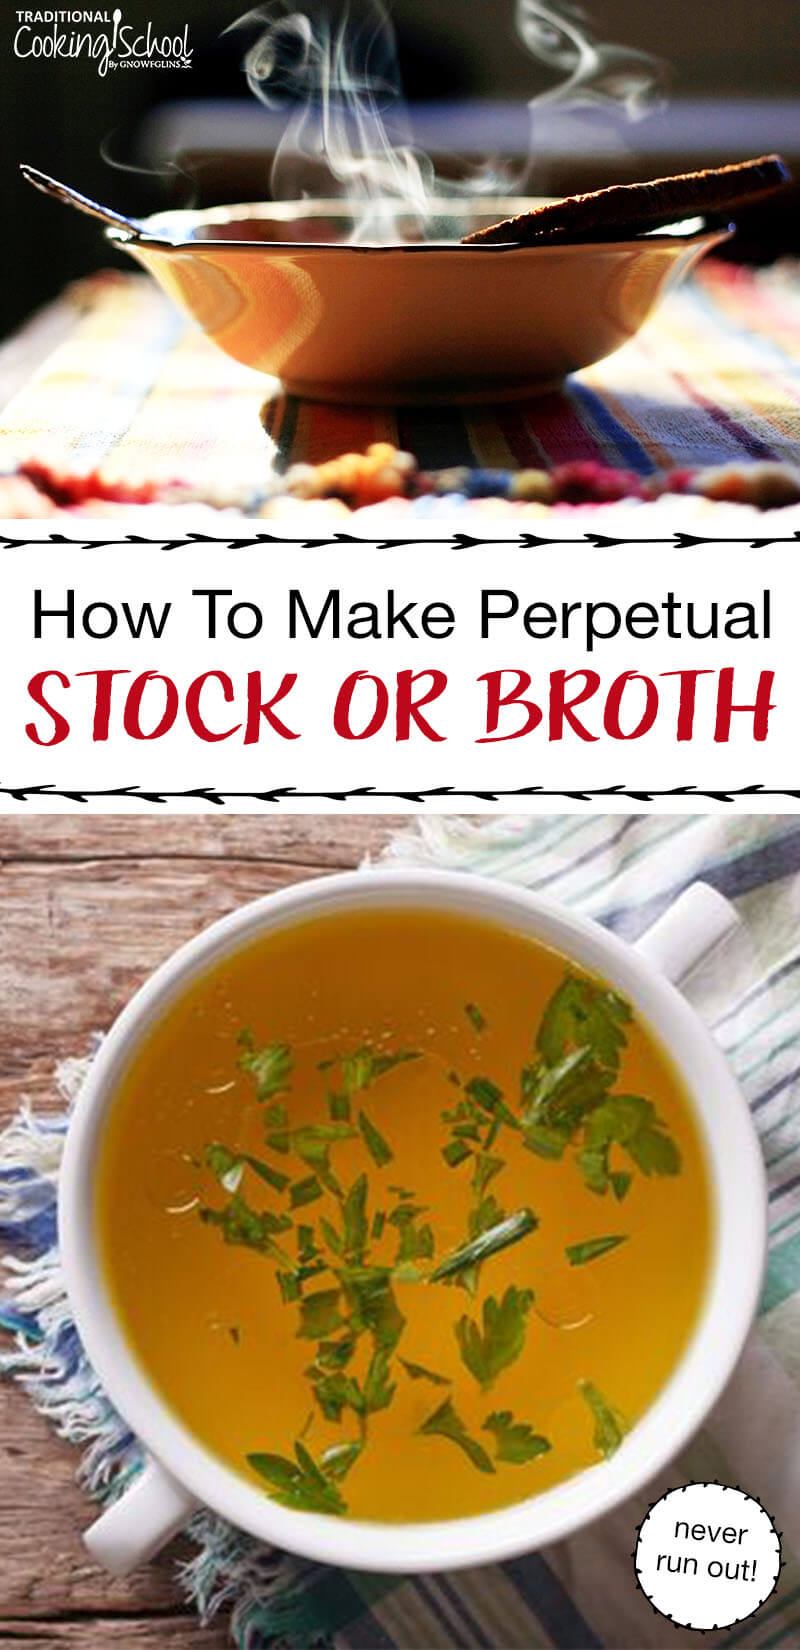 Perpetual Stock or Broth | The routine of making stock constantly can be inconvenient. With perpetual stock, however, you hardly feel like you're working at all. With perpetual stock, the stockpot is always on, always ready. You don't have to store the stock, you don't have to wash the pot daily, you're not always messing with it. | TraditionalCookingSchool.com